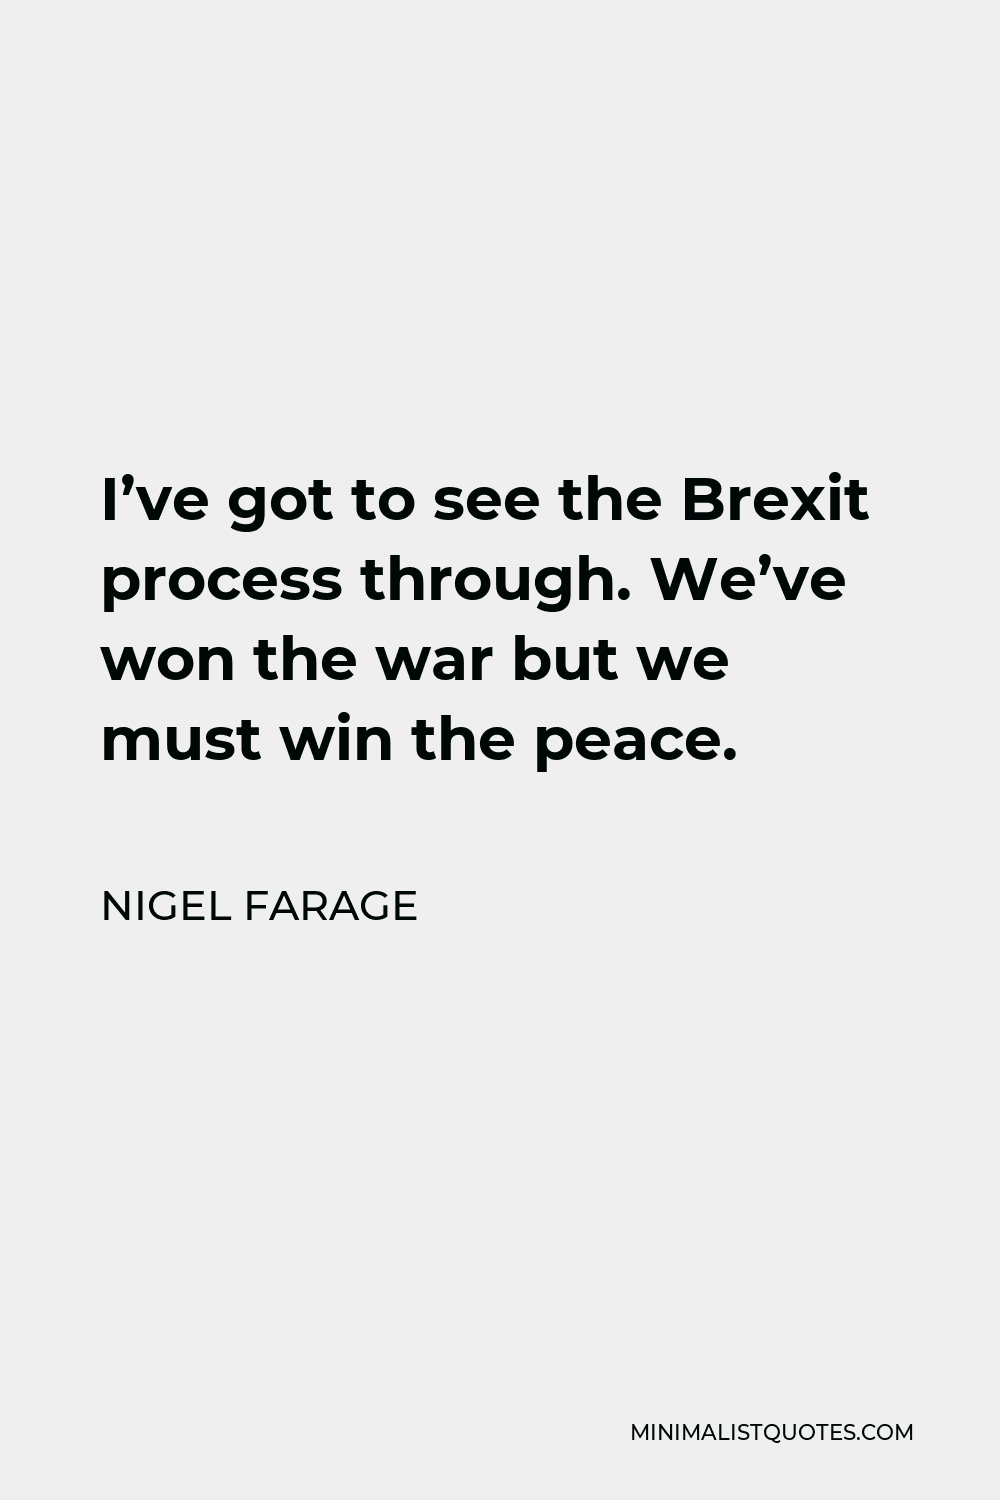 Nigel Farage Quote - I’ve got to see the Brexit process through. We’ve won the war but we must win the peace.